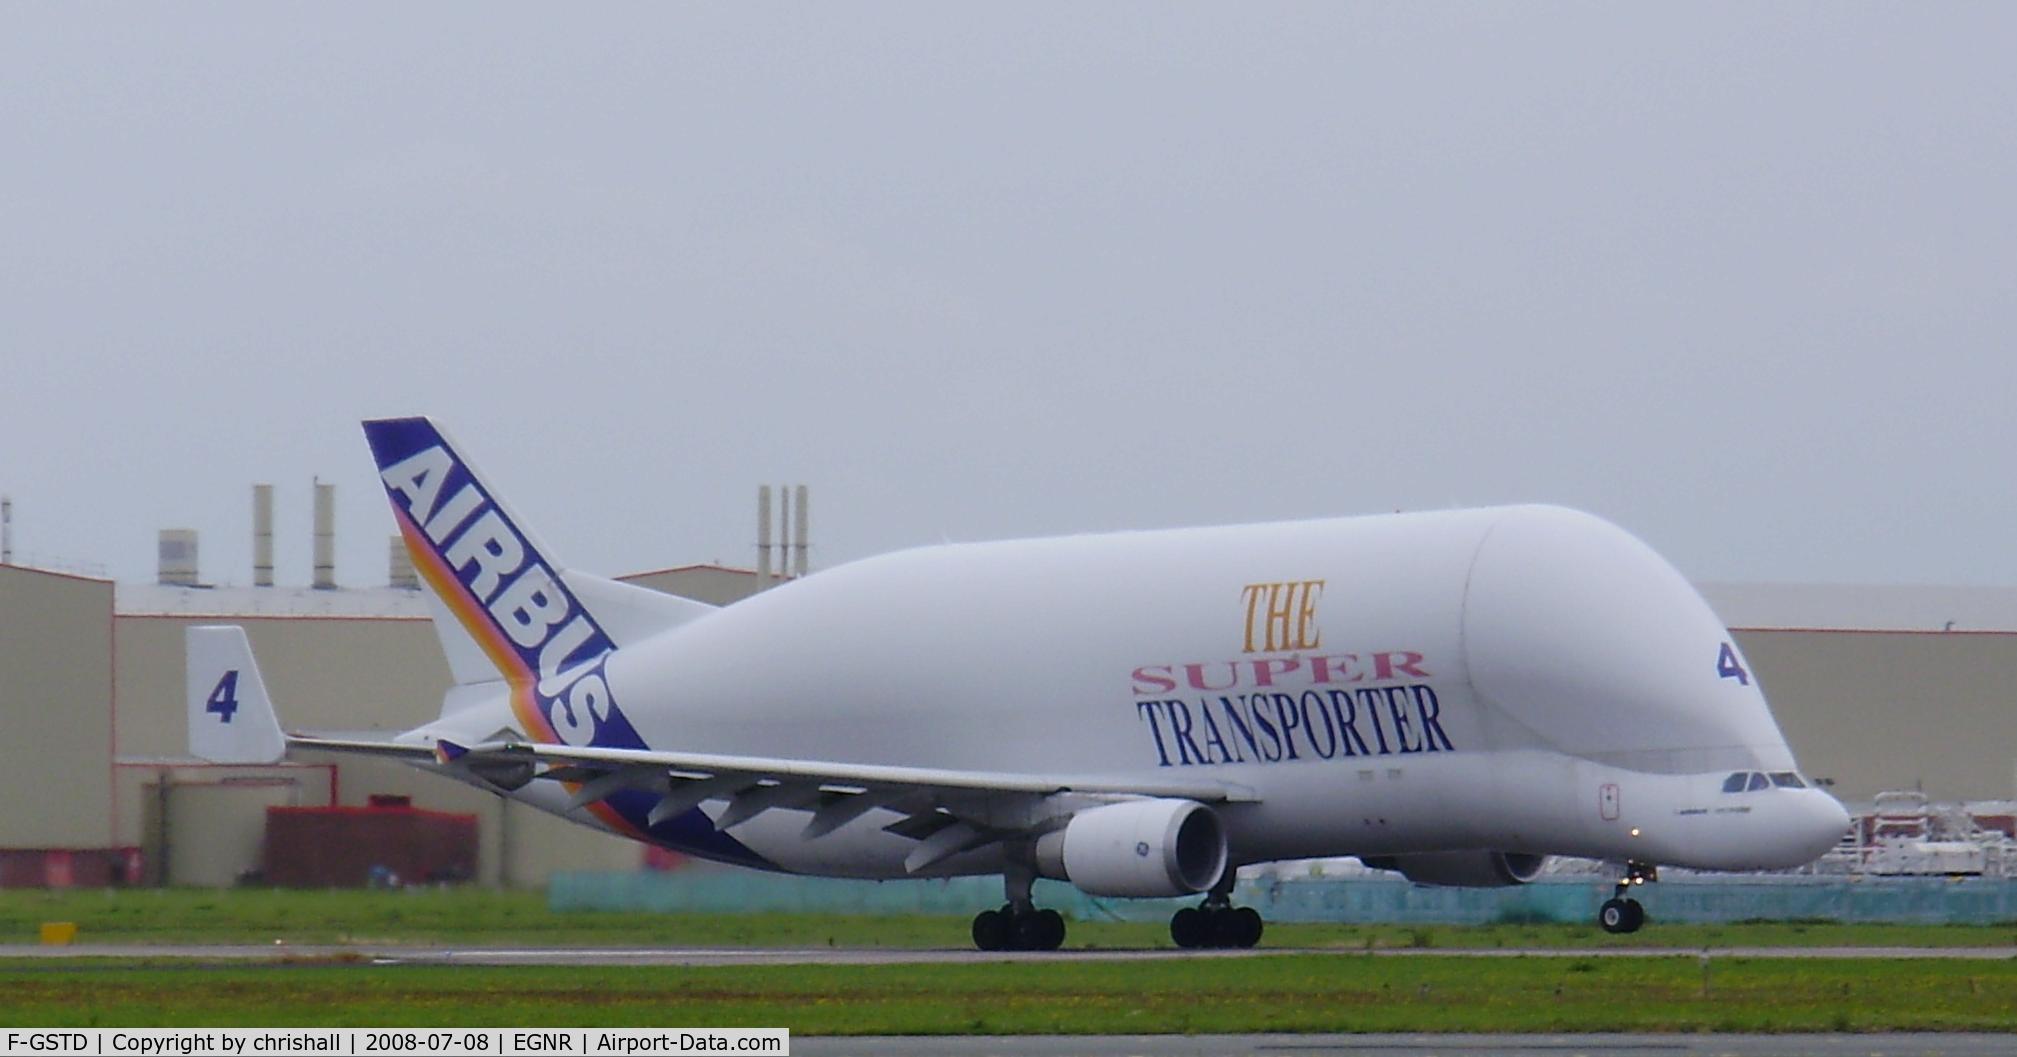 F-GSTD, 1998 Airbus A300B4-608ST Beluga C/N 776, the nose wheel has just left the runway on a 23 departure